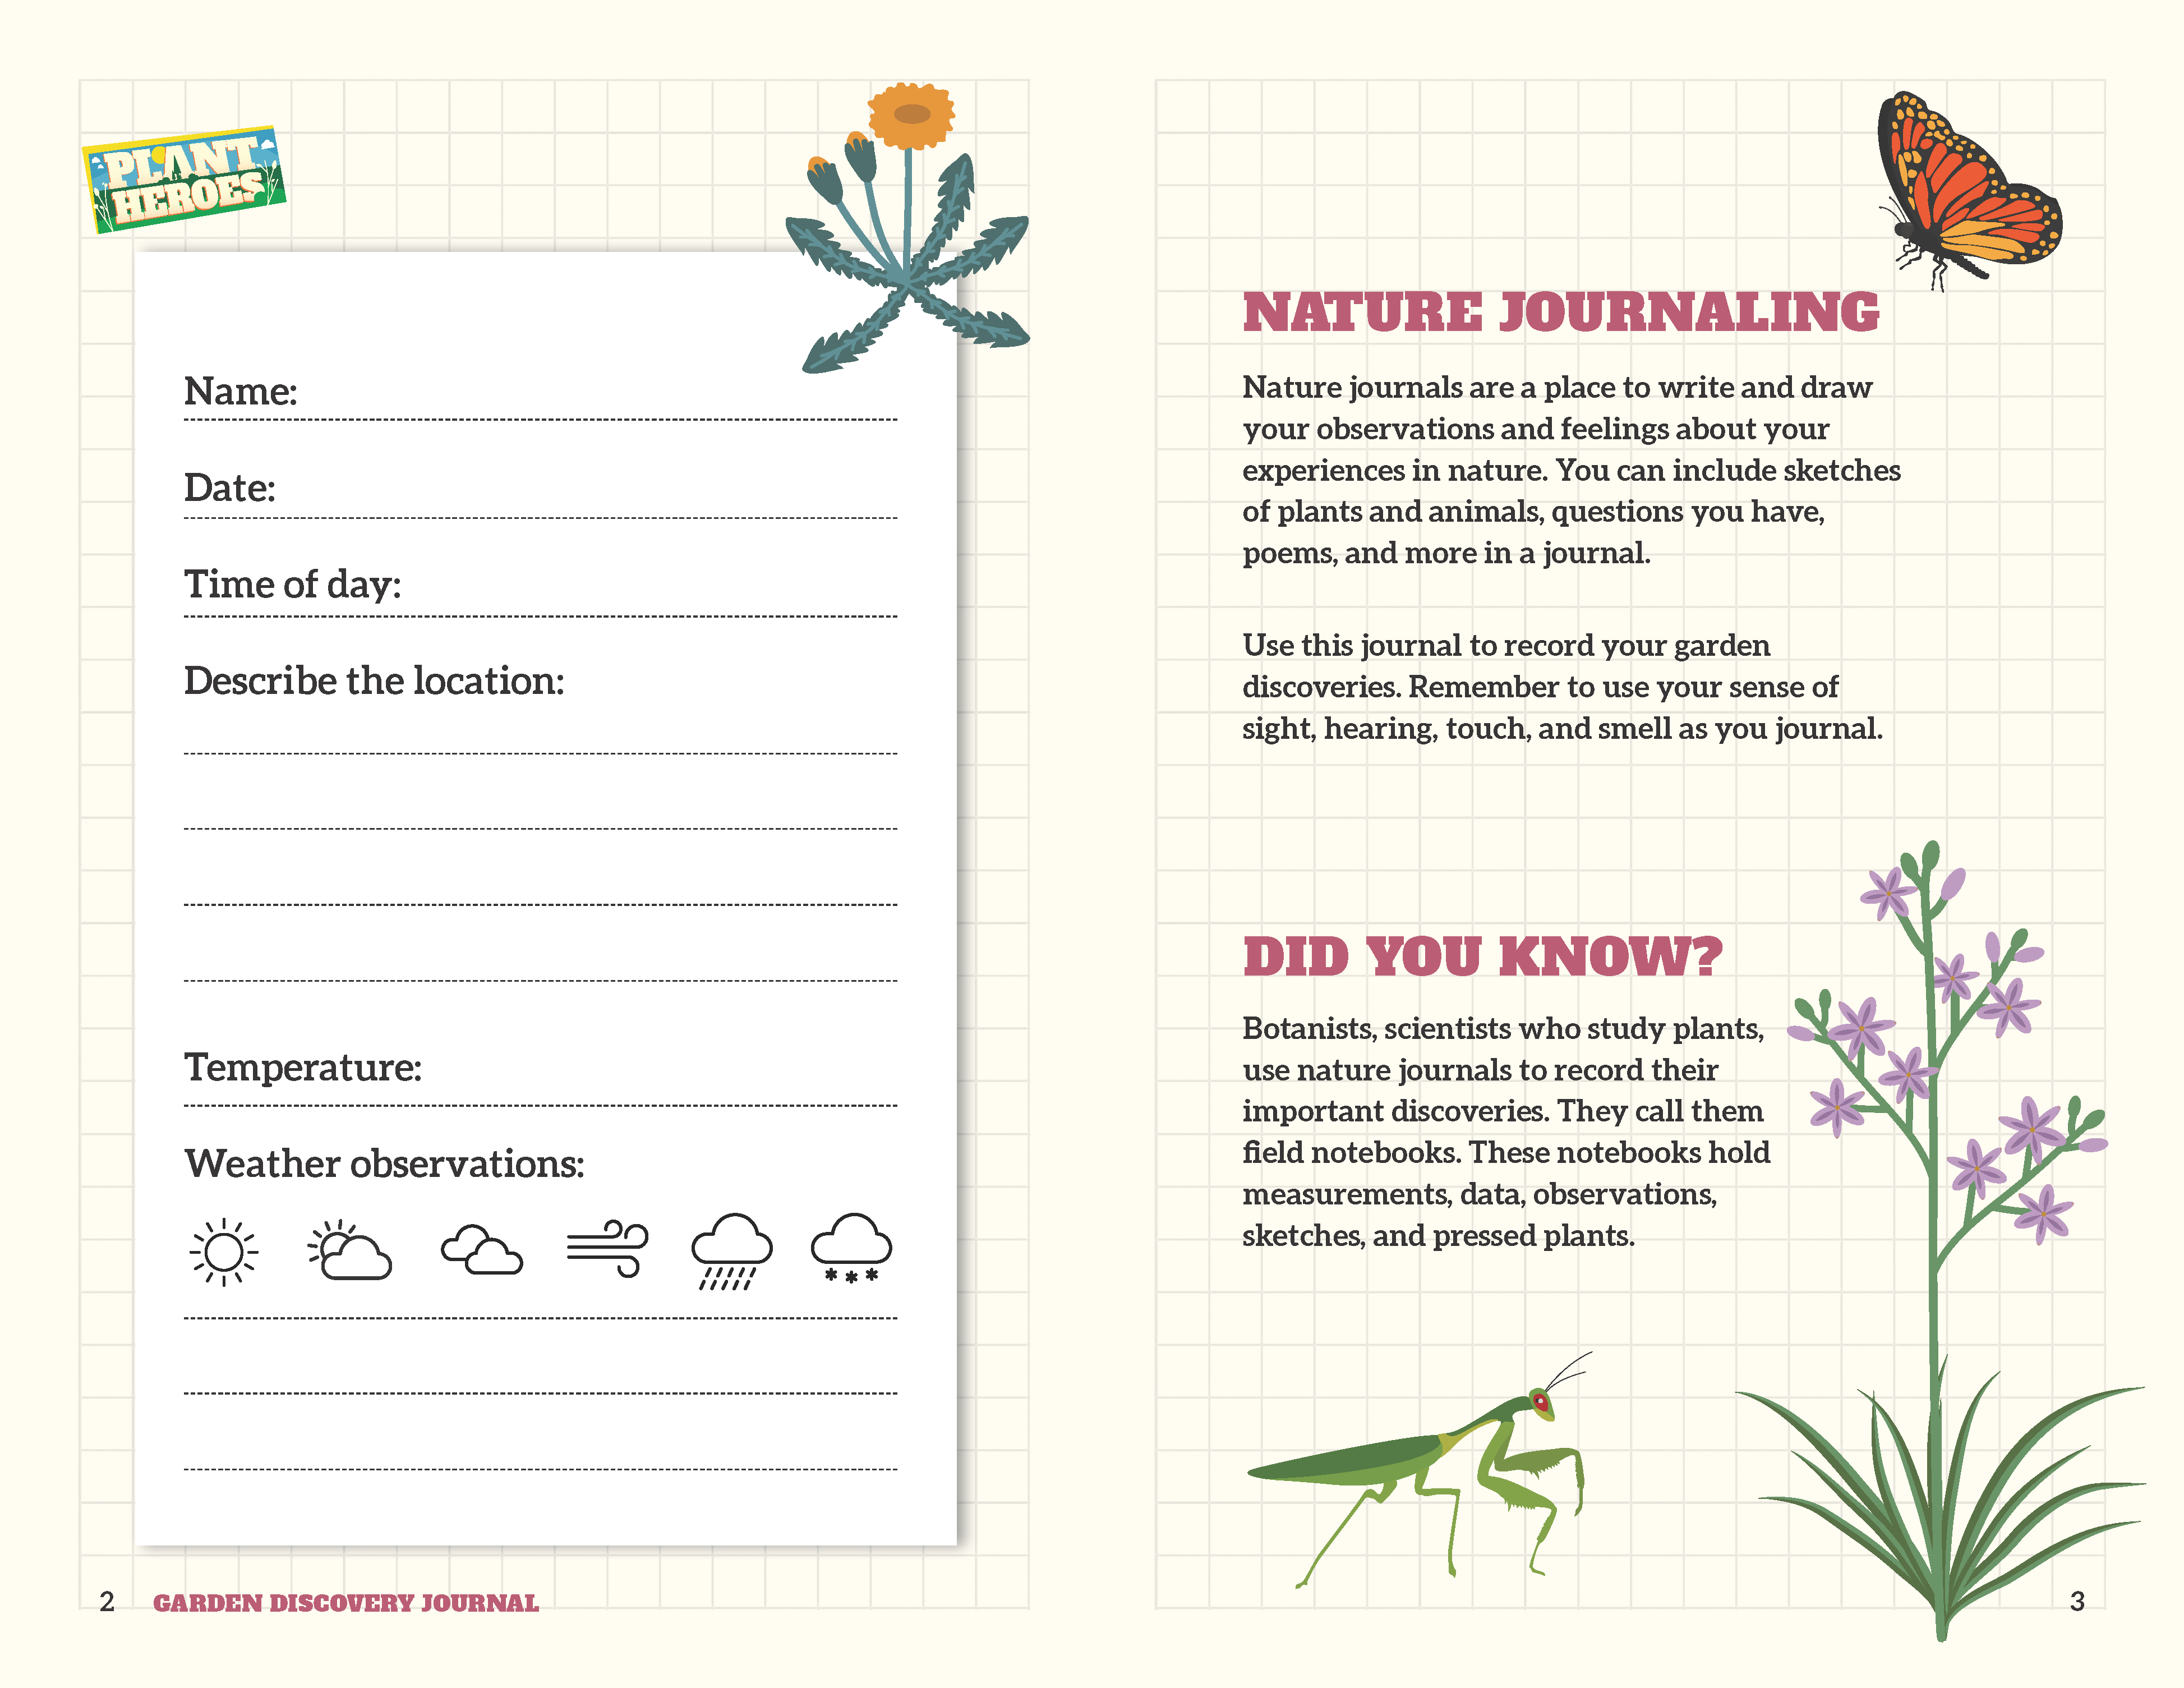 garden discovery journal pages with text about nature journal and decorative images